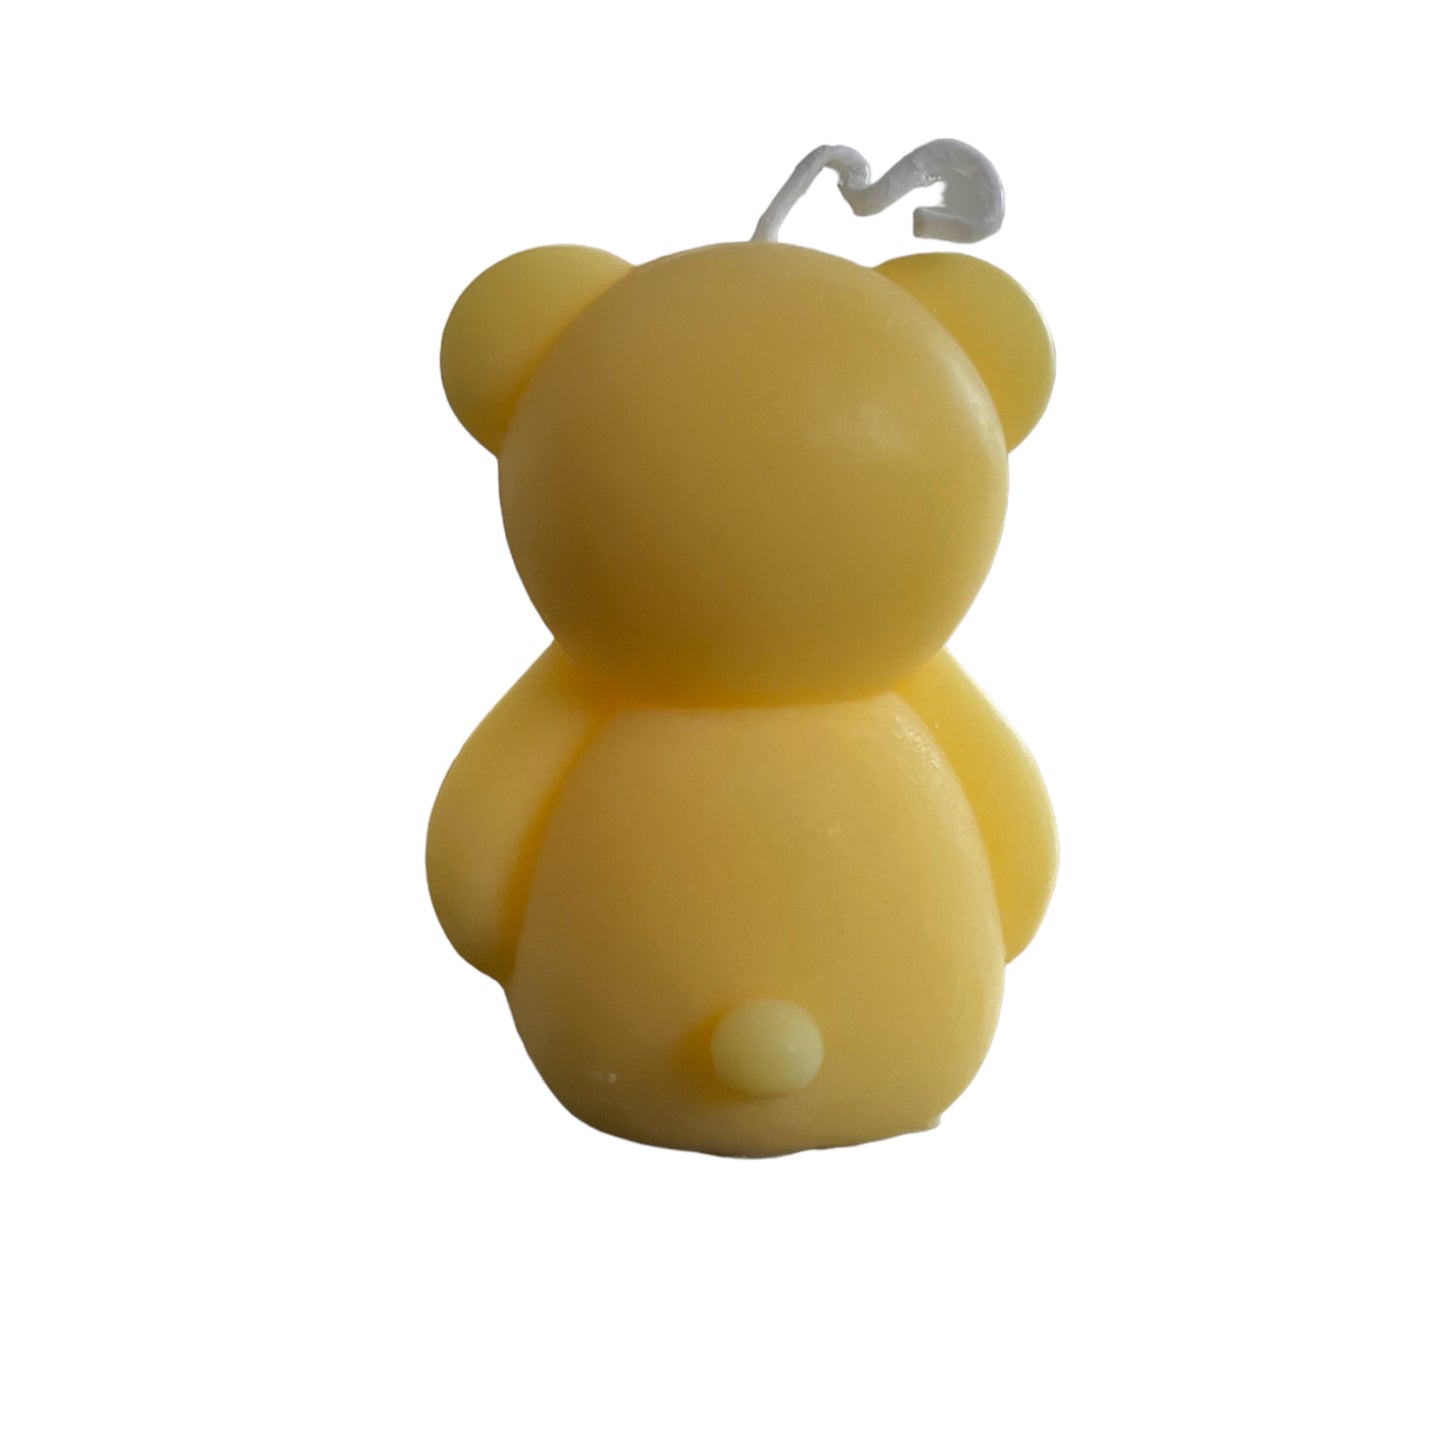 Yellow Bear Candle